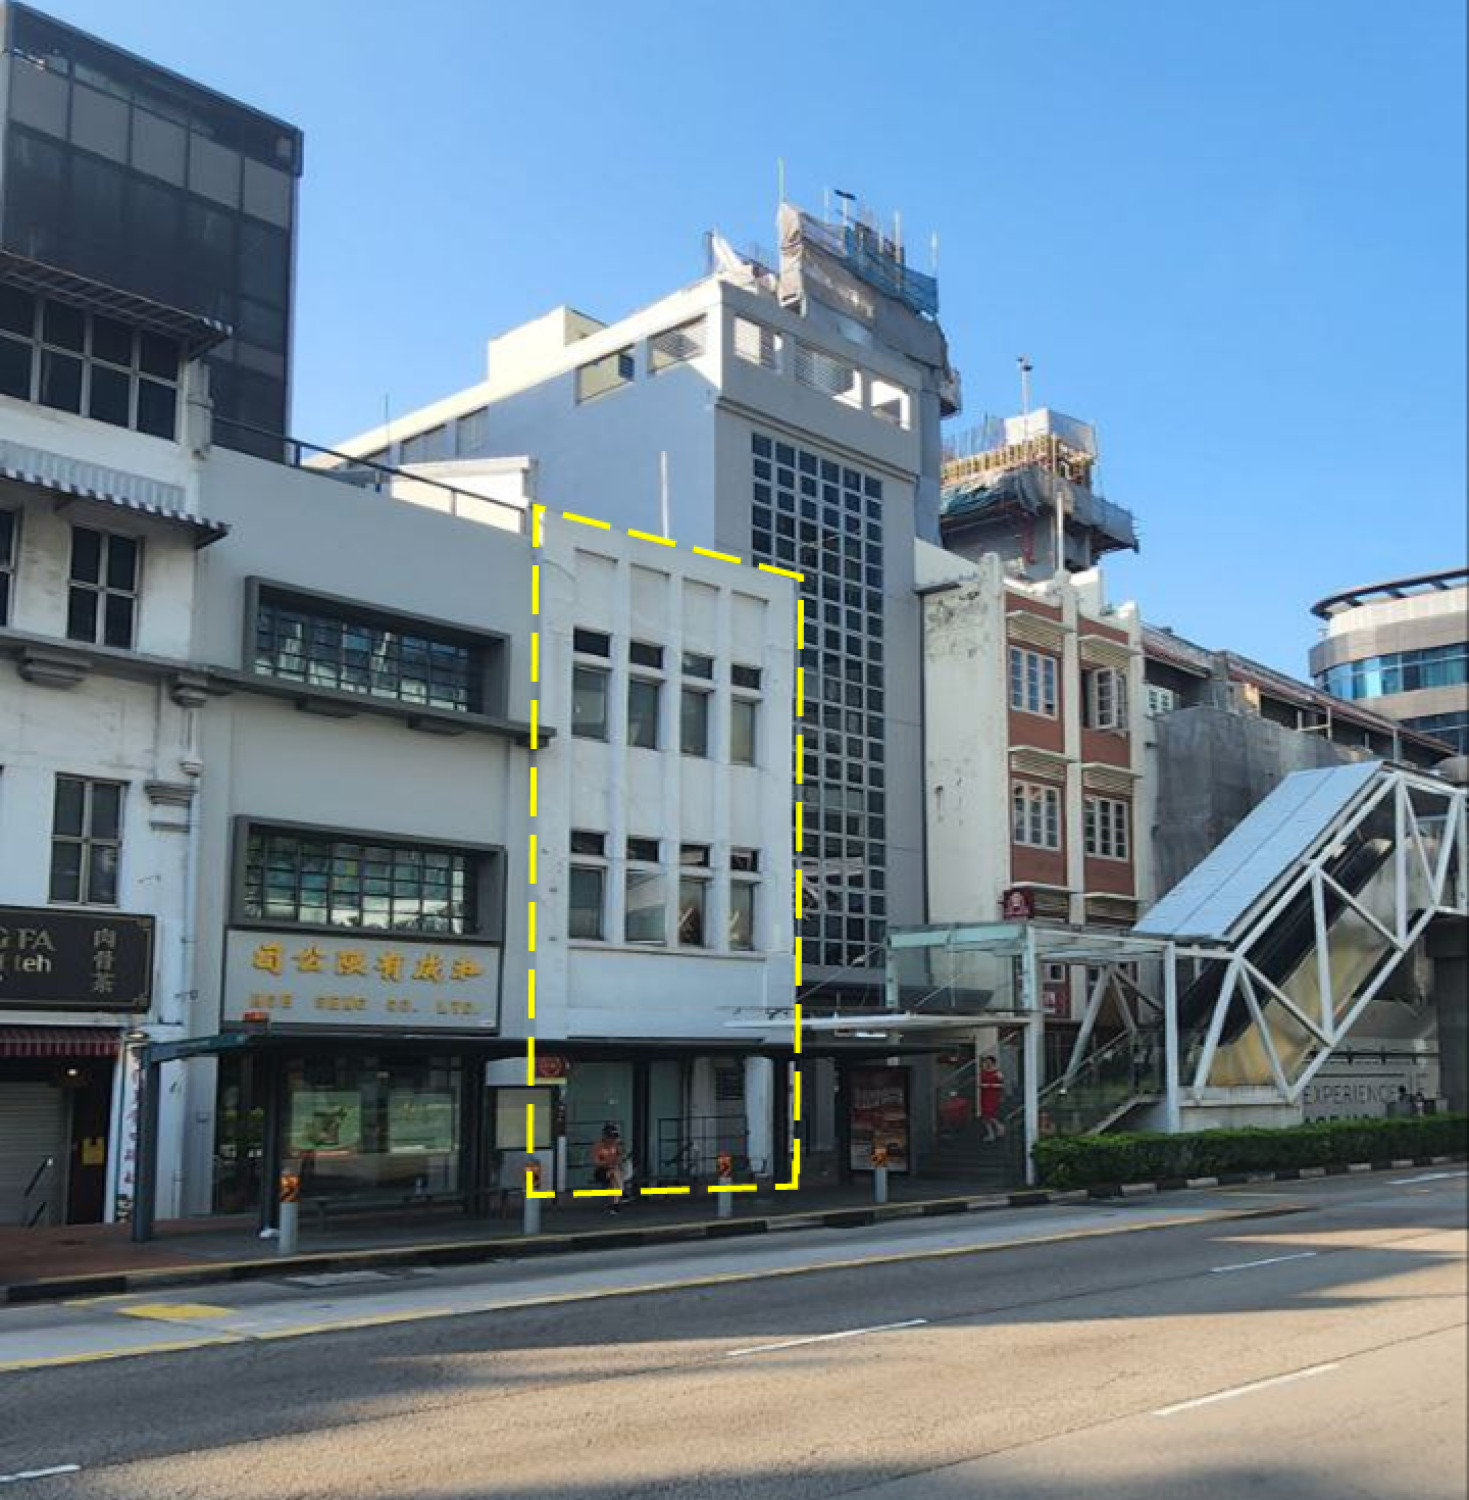 Commercial shophouse on New Bridge Road up for sale, valued at $22 mil - Property News